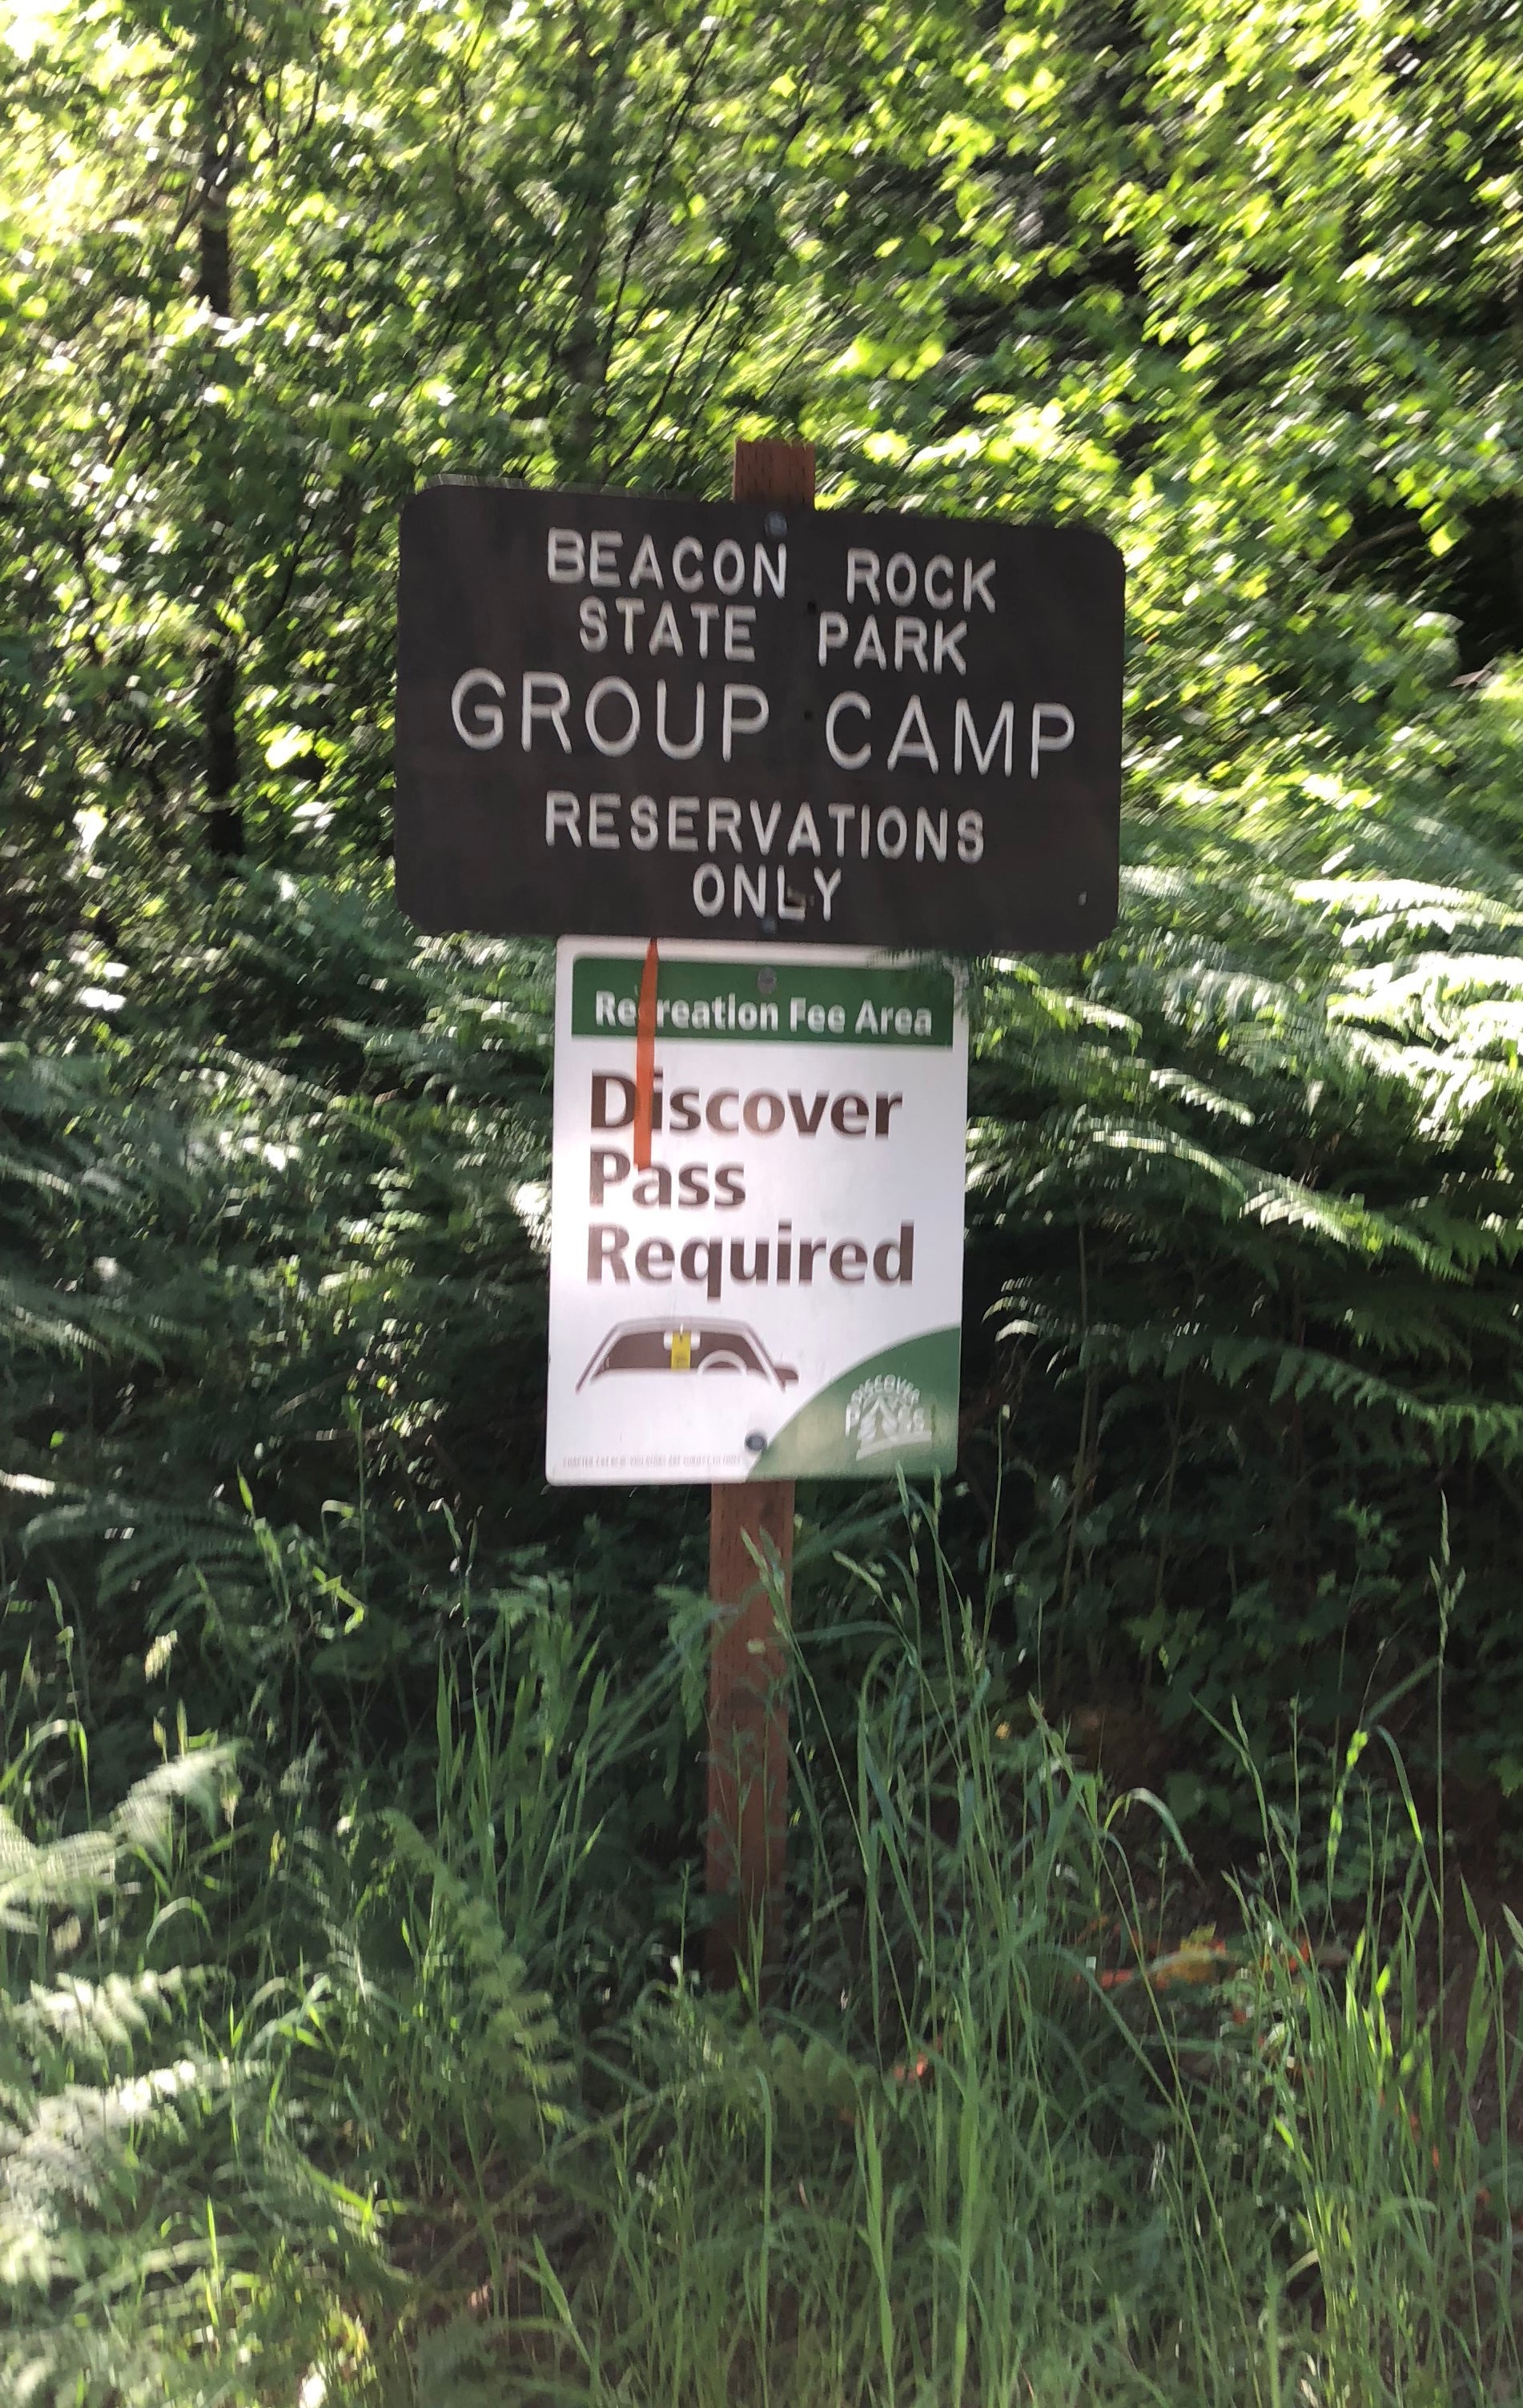 Camper submitted image from Beacon Rock State Park Group Campground — Beacon Rock State Park - 2